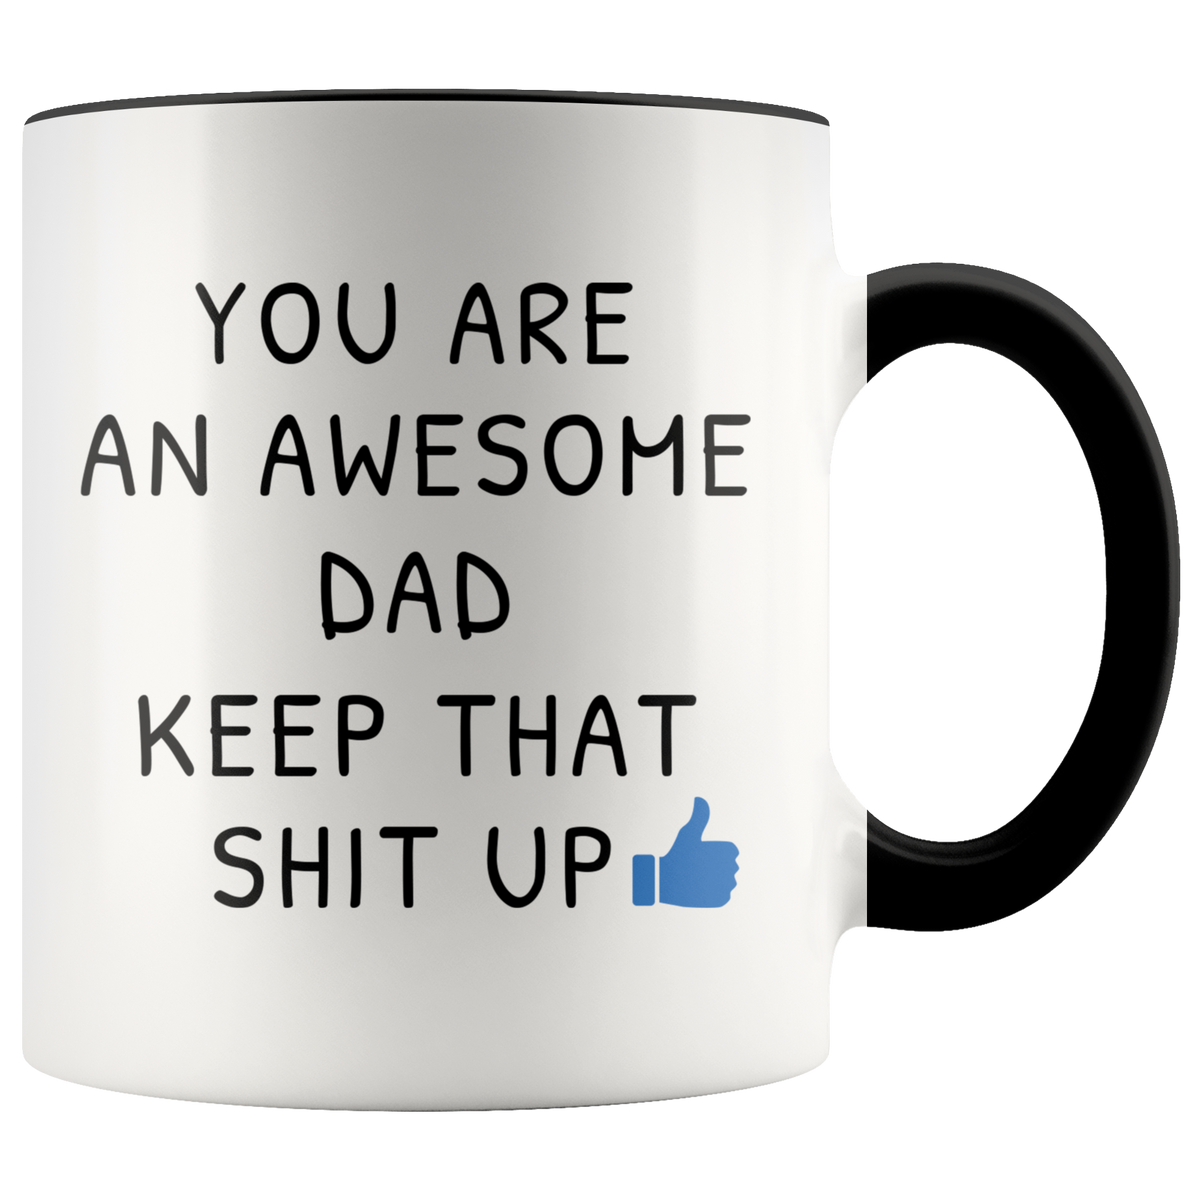 Funny Gift For Dad From Daughter - You Are An Awesome Dad Accent Coffee Mug 11oz (black)